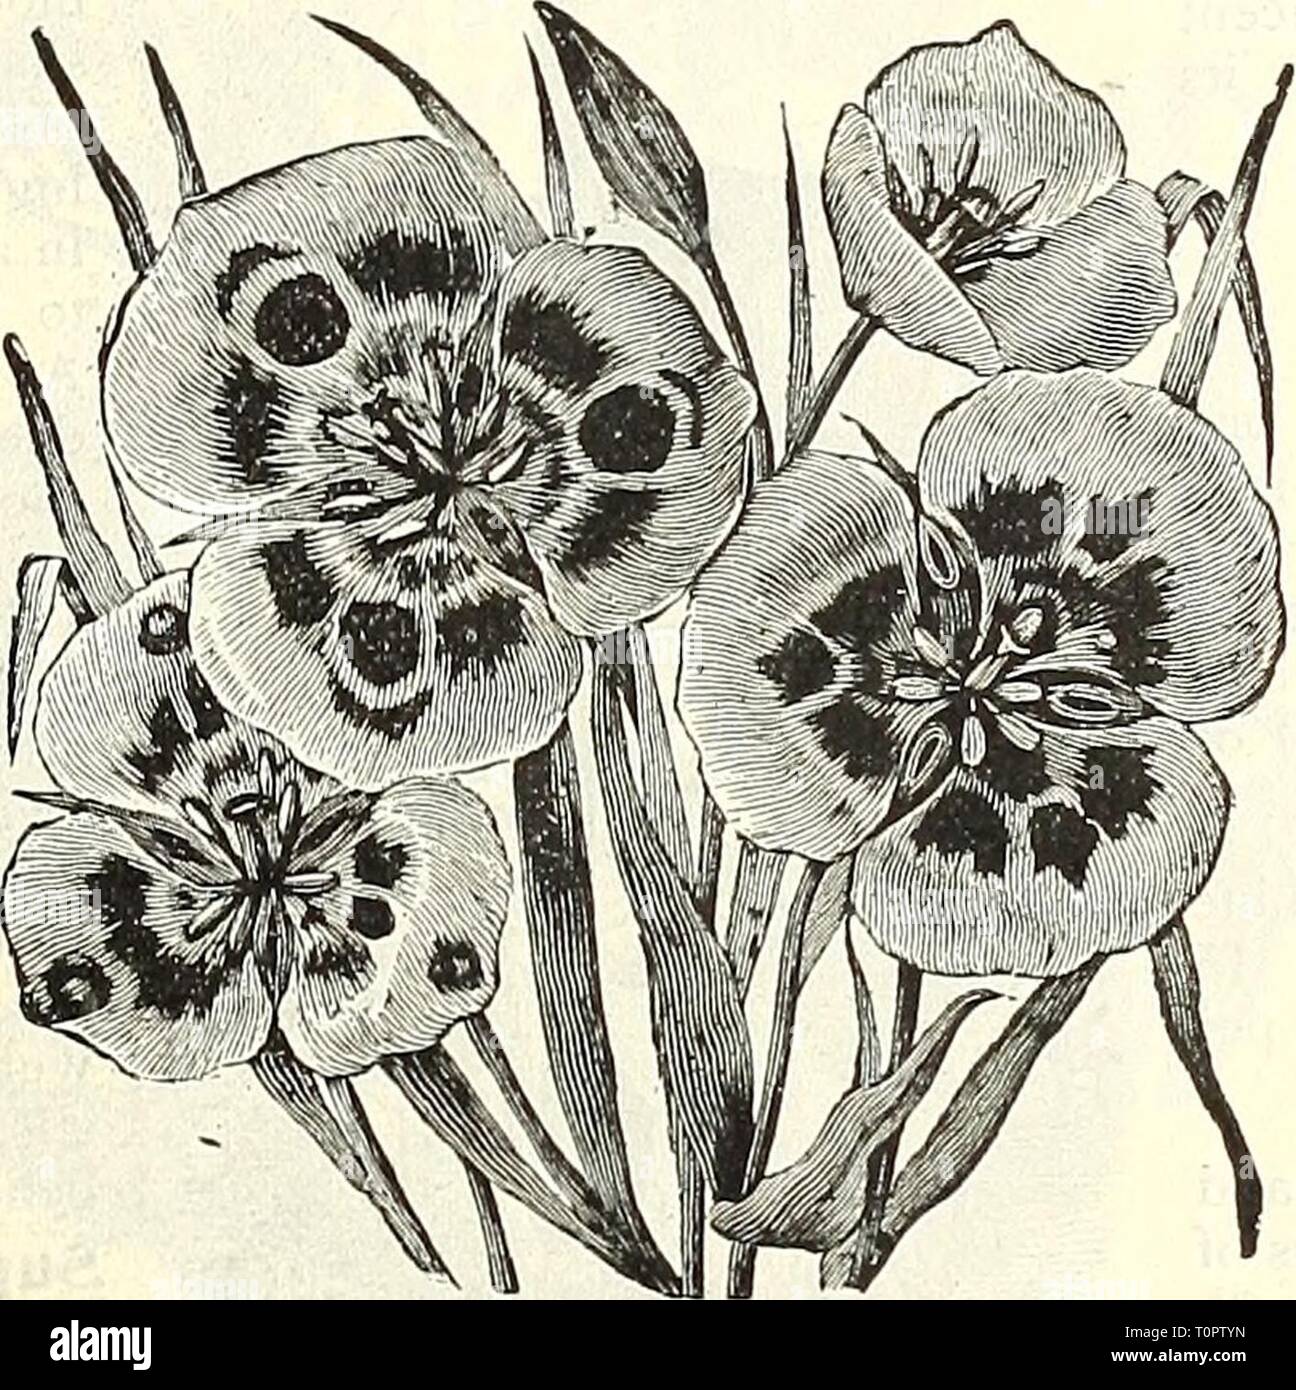 Dreer's autumn 1902 catalogue (1902) Dreer's autumn 1902 catalogue  dreersautumn19021902henr Year: 1902  Double Anemones, ANEMONE FUEGENS. The Anemone Fulgens is one of the most attractive and desirable flowers for winter forcing or early spring bloom- ing. Its dazzling vermilion flowers are very pretty, and are borne in pro- fusion. 3 cts. each ; 30 cts. per doz.; $2.00 per 100. Anemones free by mail at dozen rates; 15 cts. additional per 100. BABIANA. A charming genus with leaves of darkest green, thickly covered with downy hairs, and bearing showy spikes of flowers. They should have the pro Stock Photo